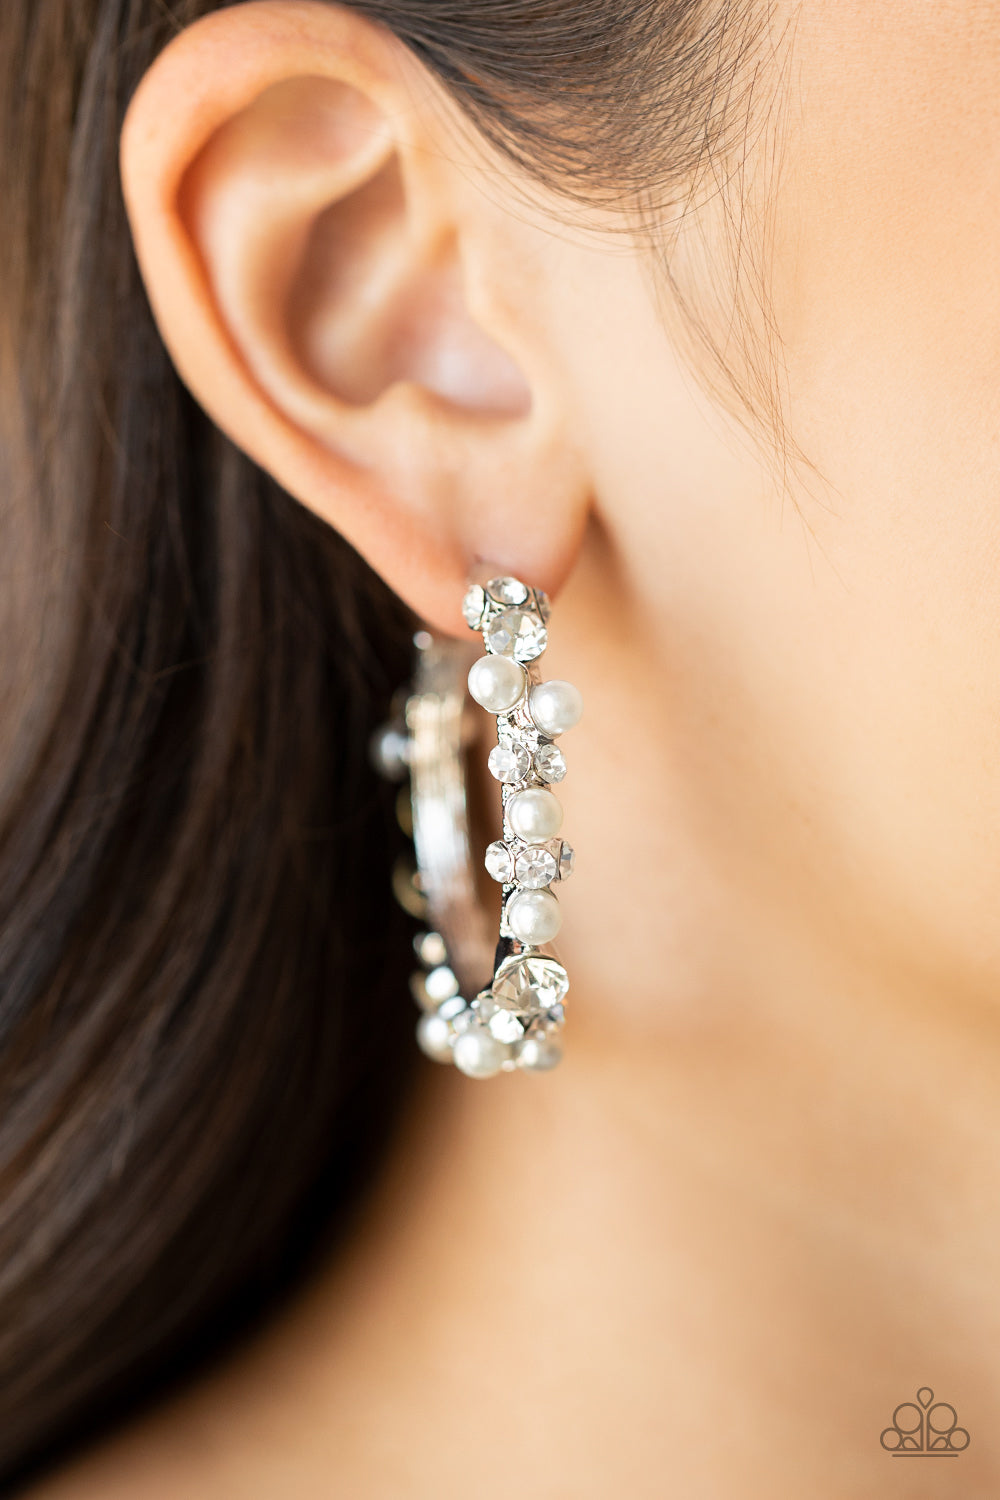 Paparazzi Accessories - Let There Be SOCIALITE #E571 - White Earrings